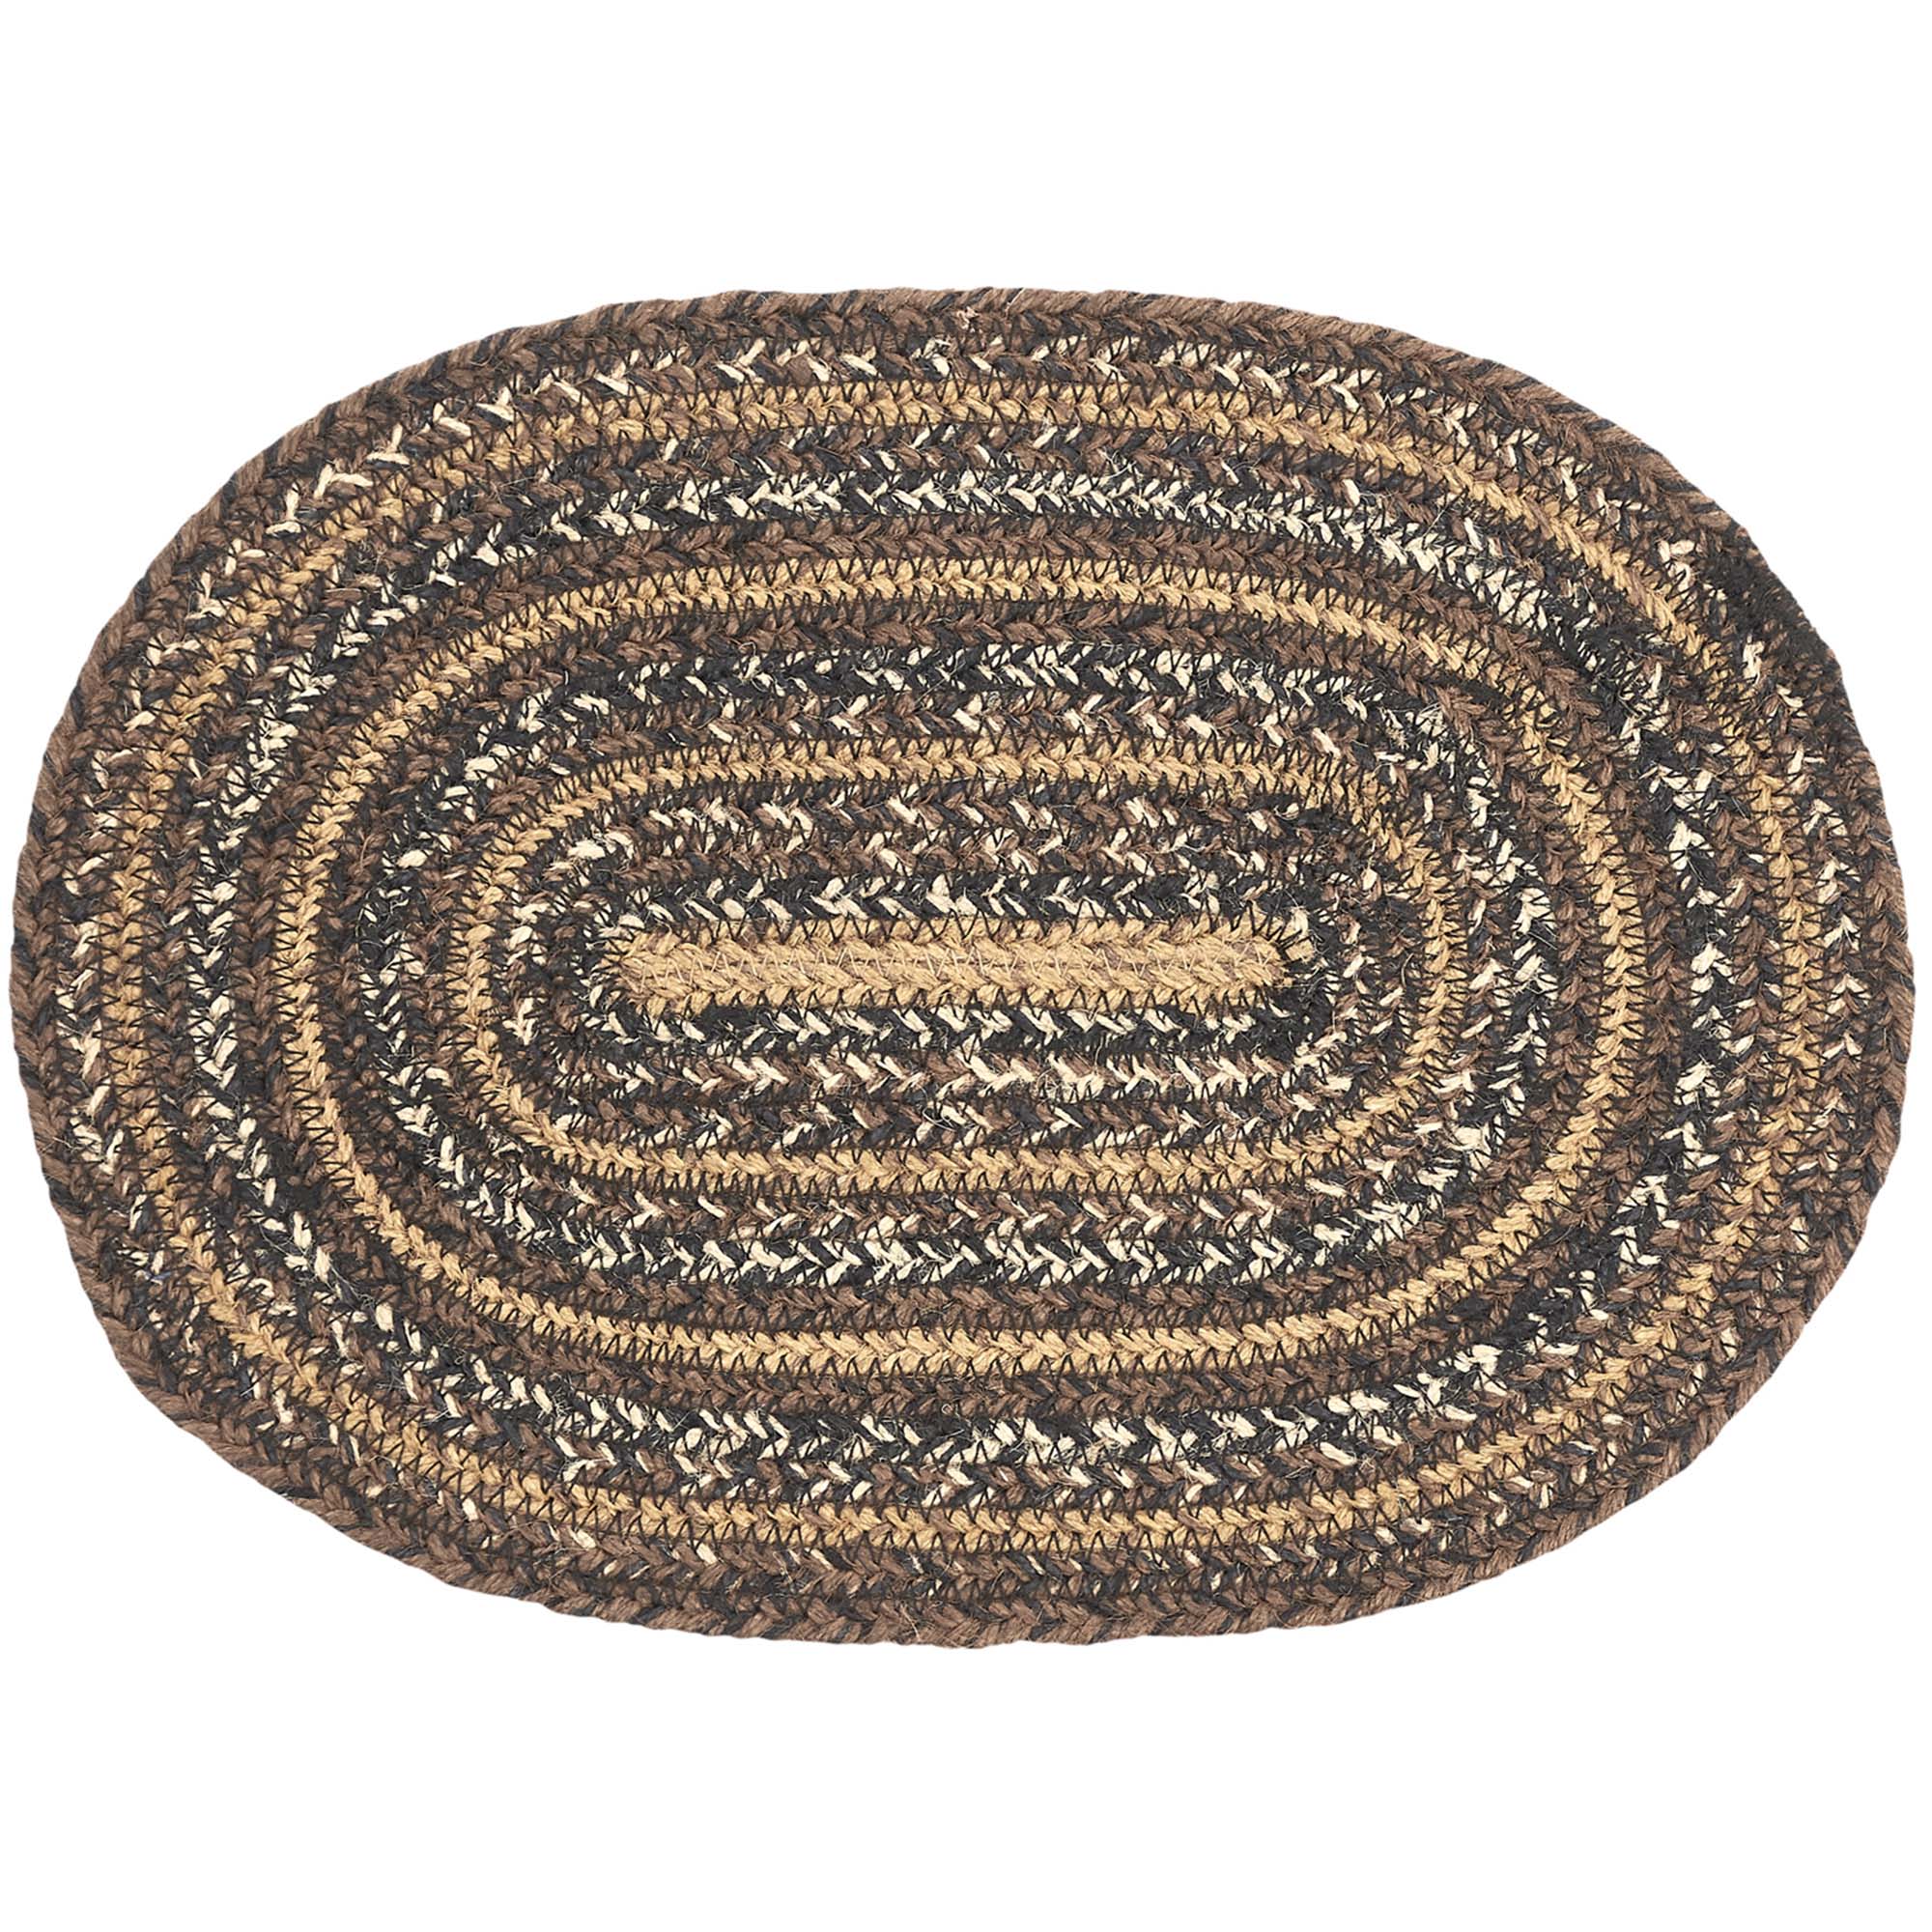 Oak & Asher Espresso Jute Oval Placemat 10x15 By VHC Brands